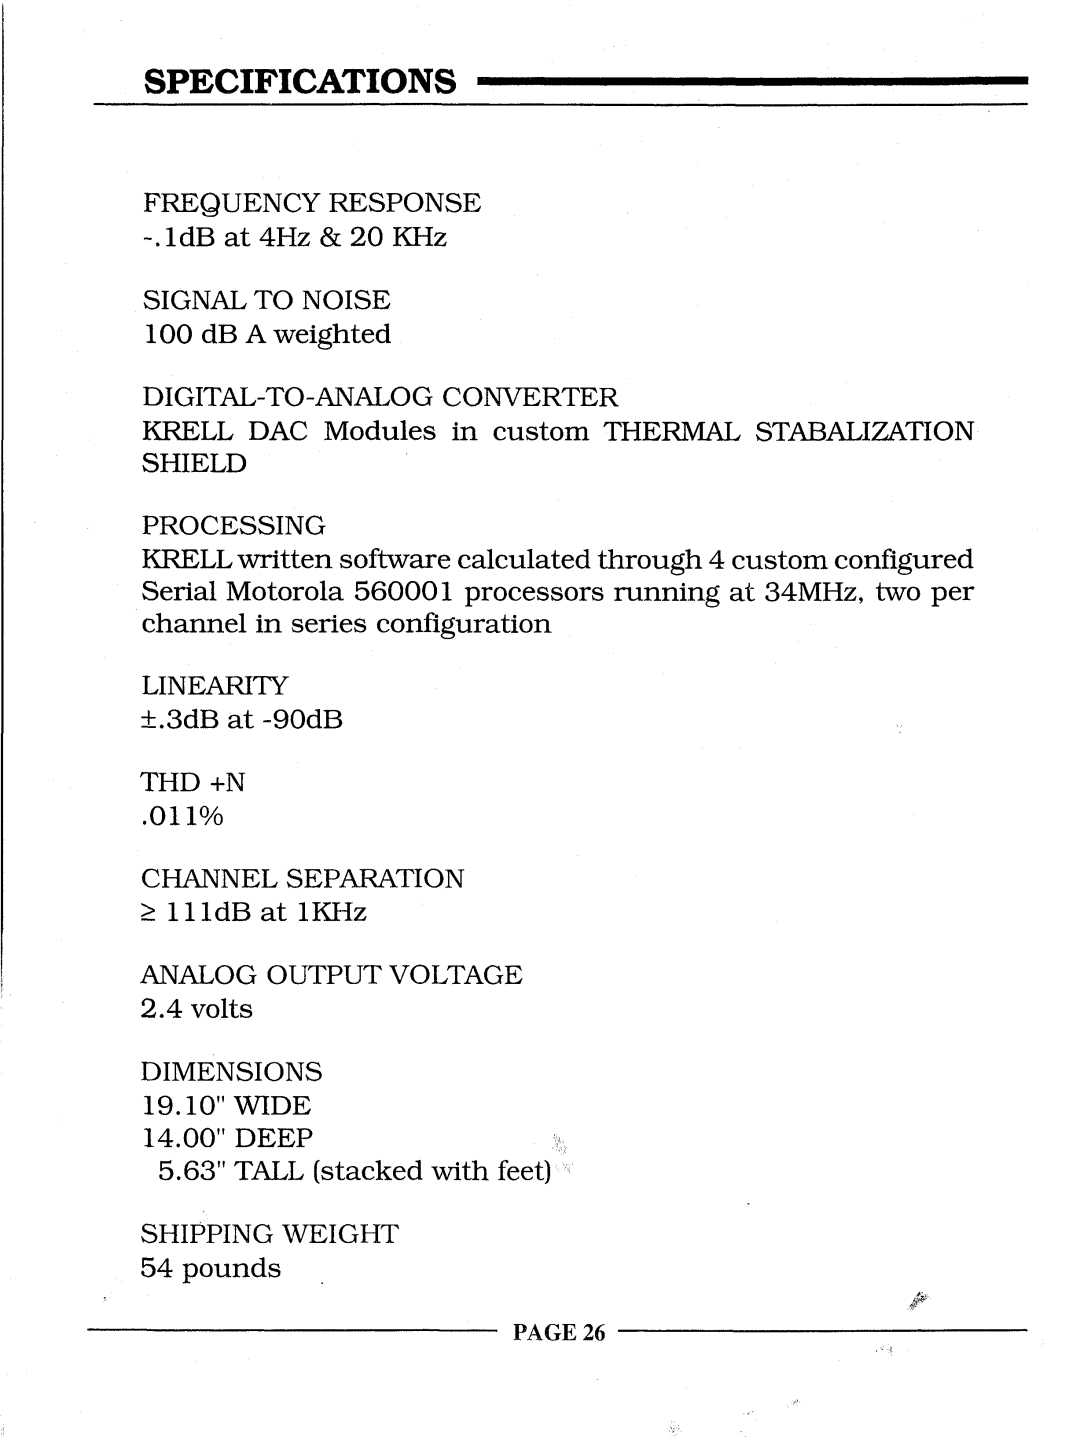 Krell Industries REFERENCE 64 manual Specifications, PAGE26 